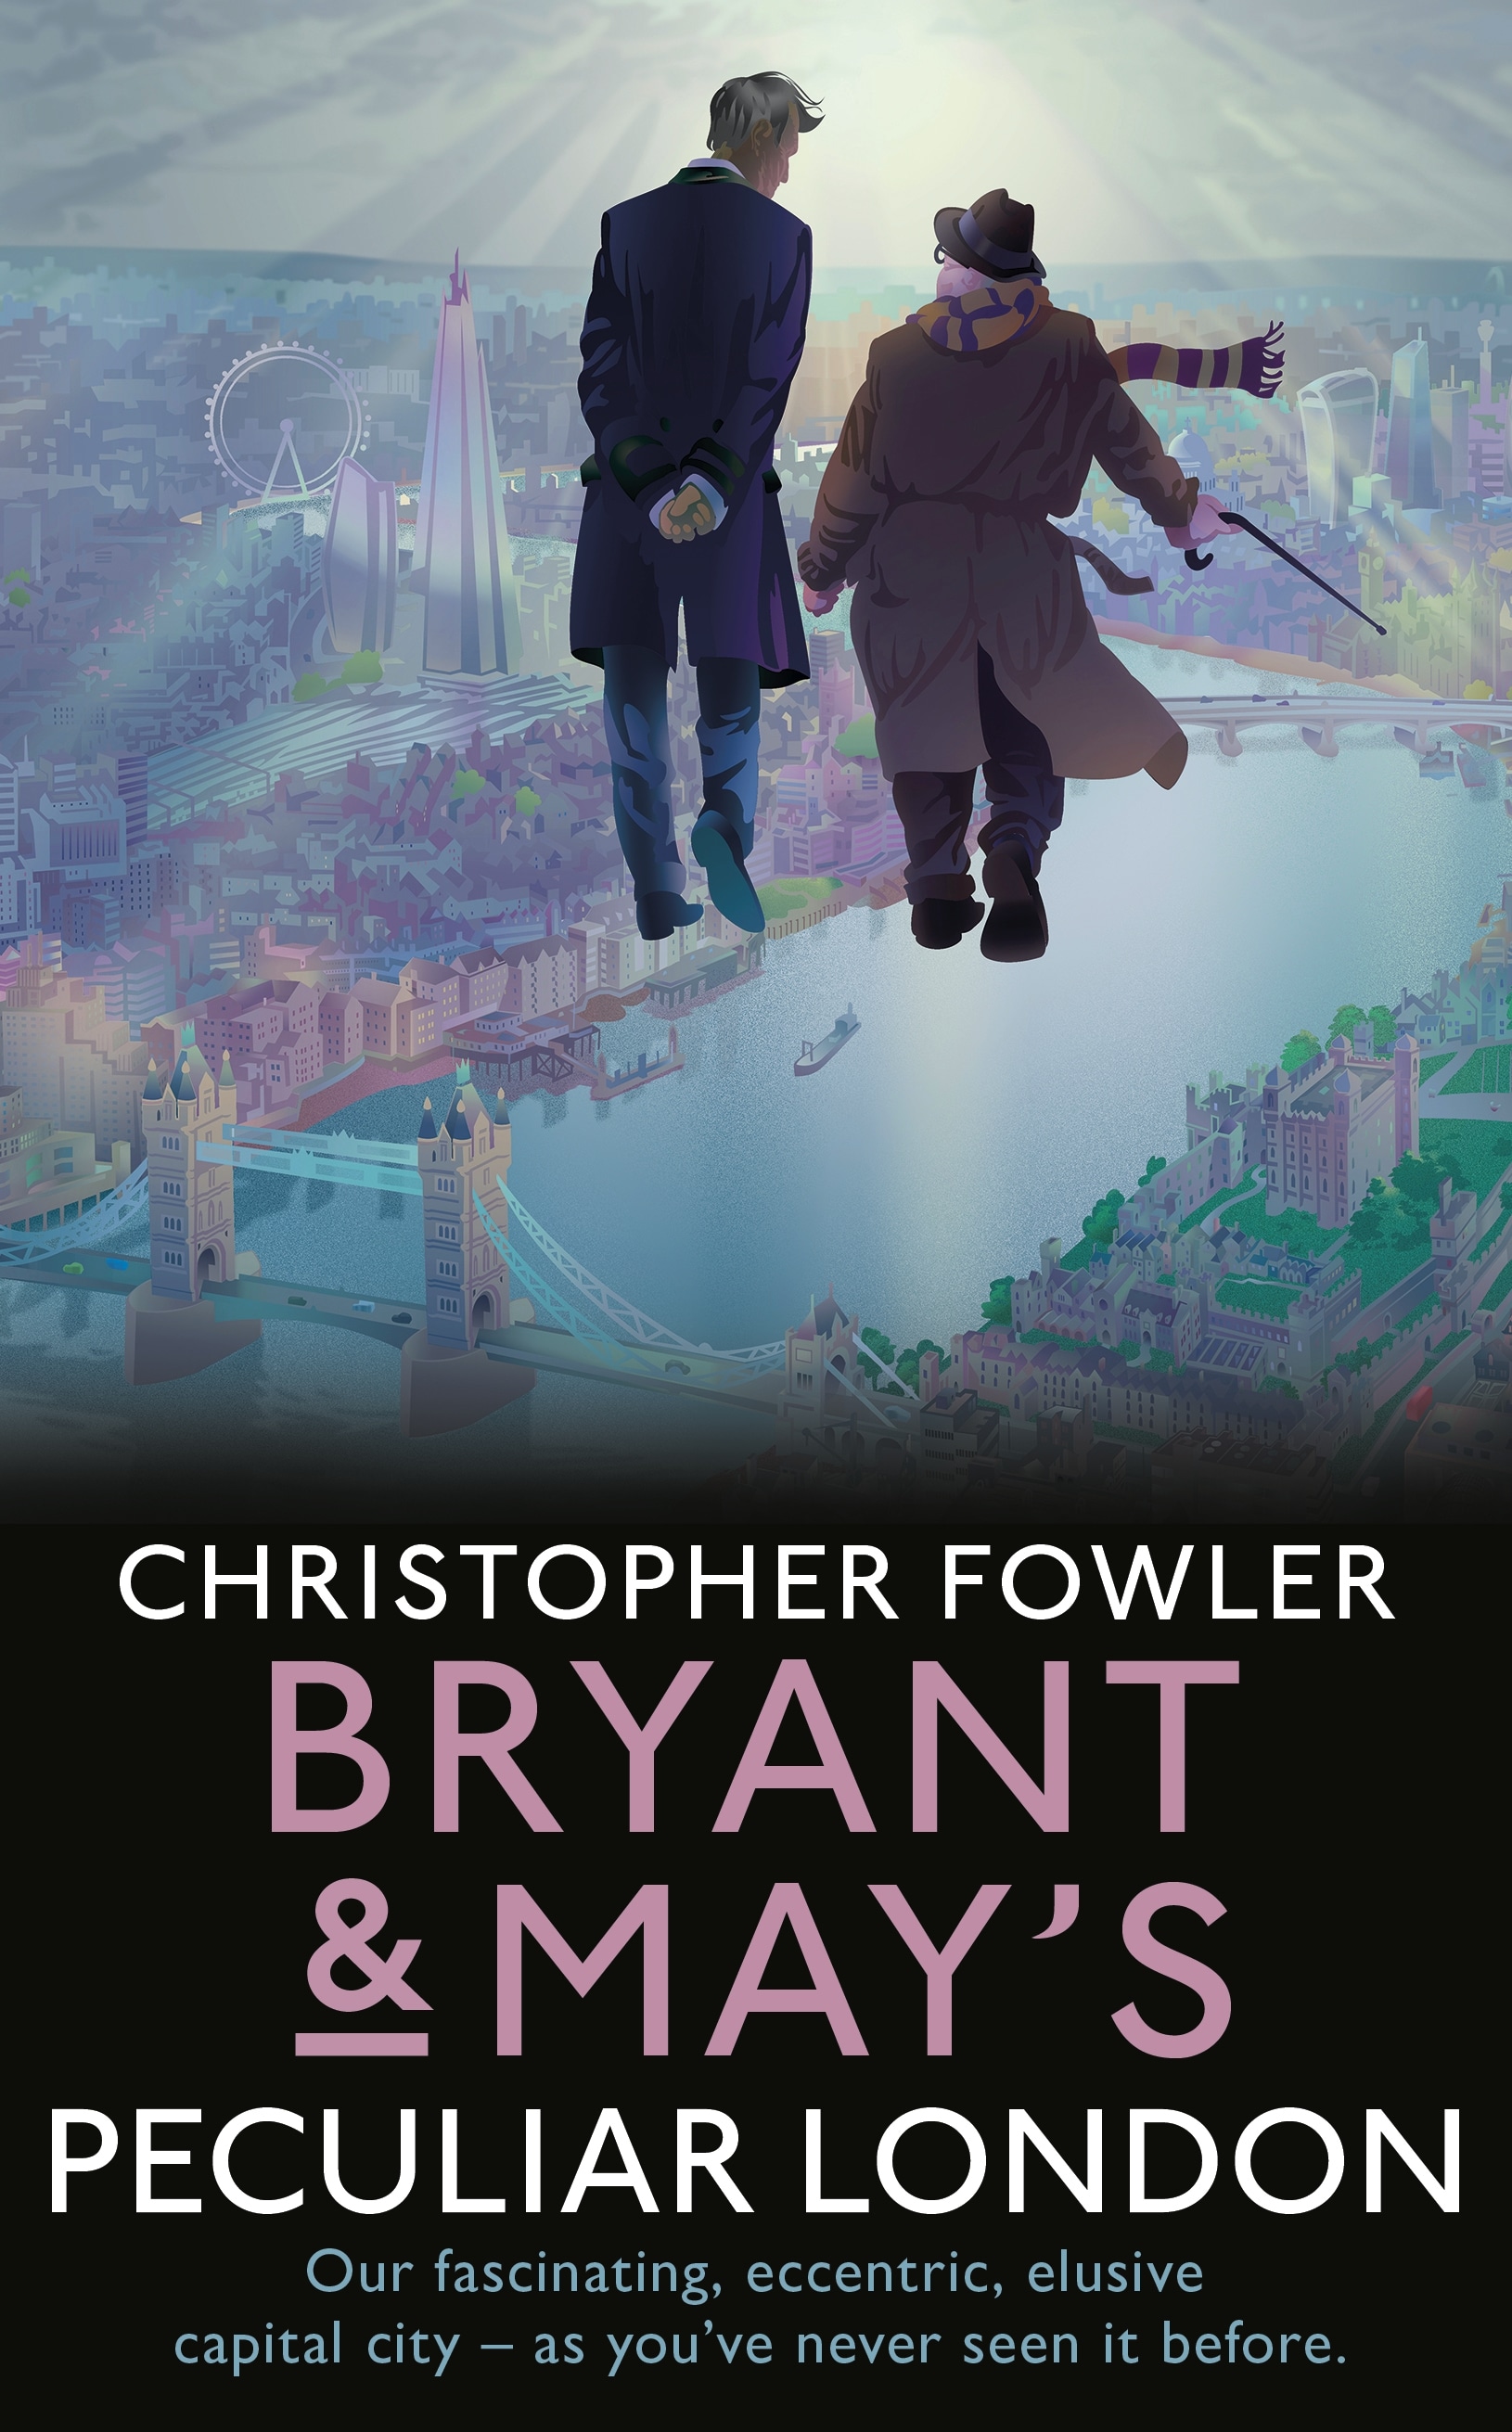 Book “Bryant & May’s Peculiar London” by Christopher Fowler — July 14, 2022